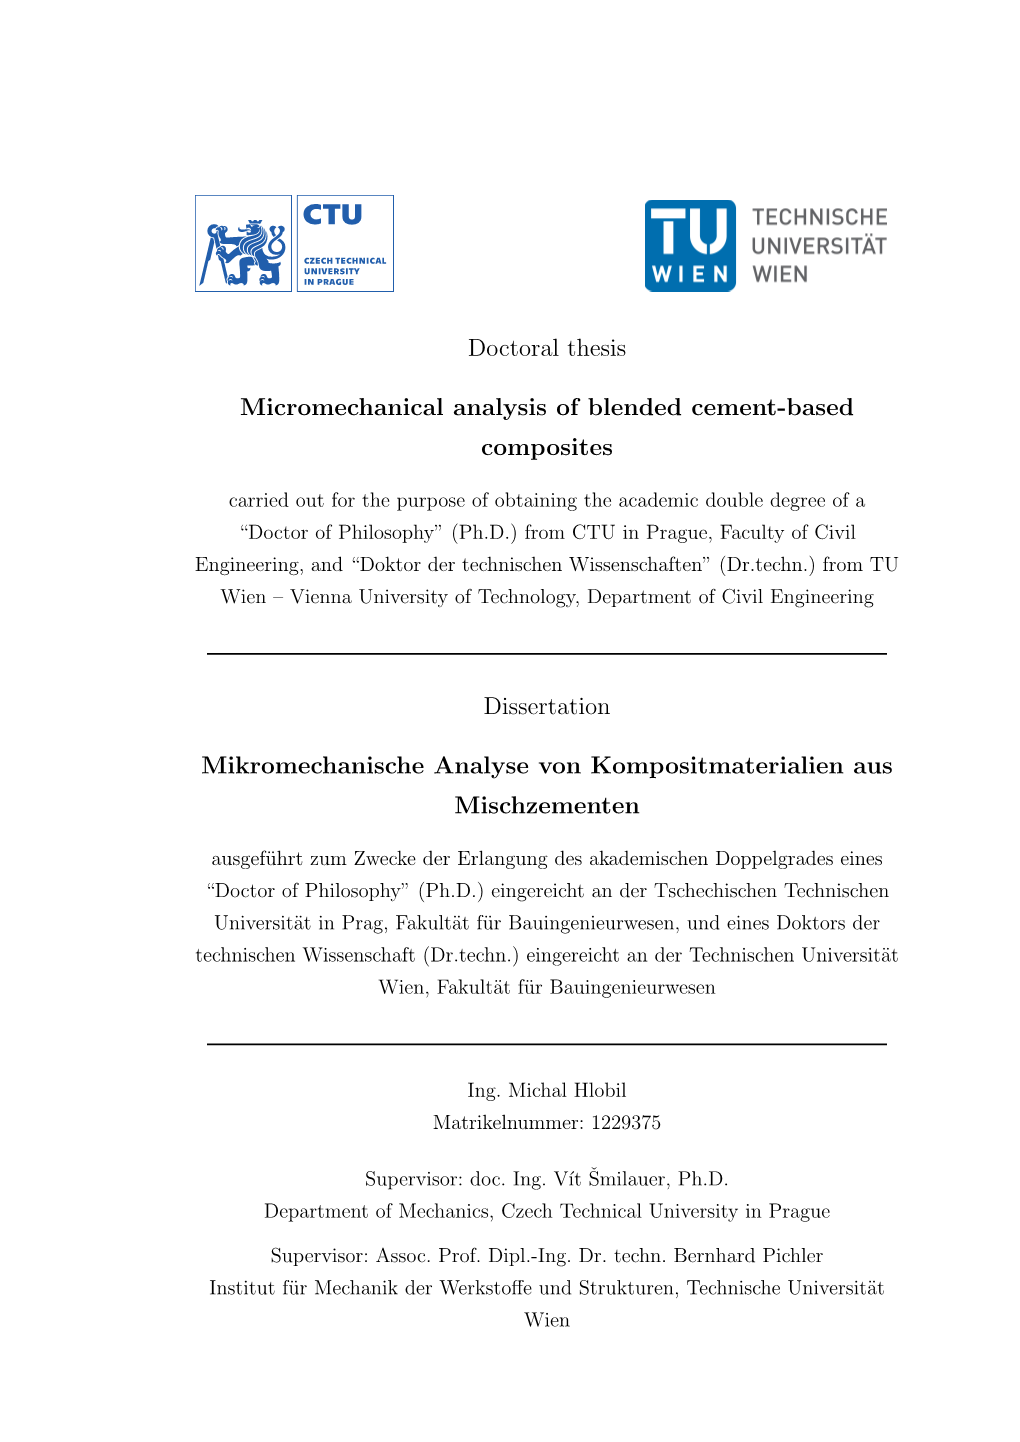 Micromechanical Analysis of Blended Cement-Based Composites